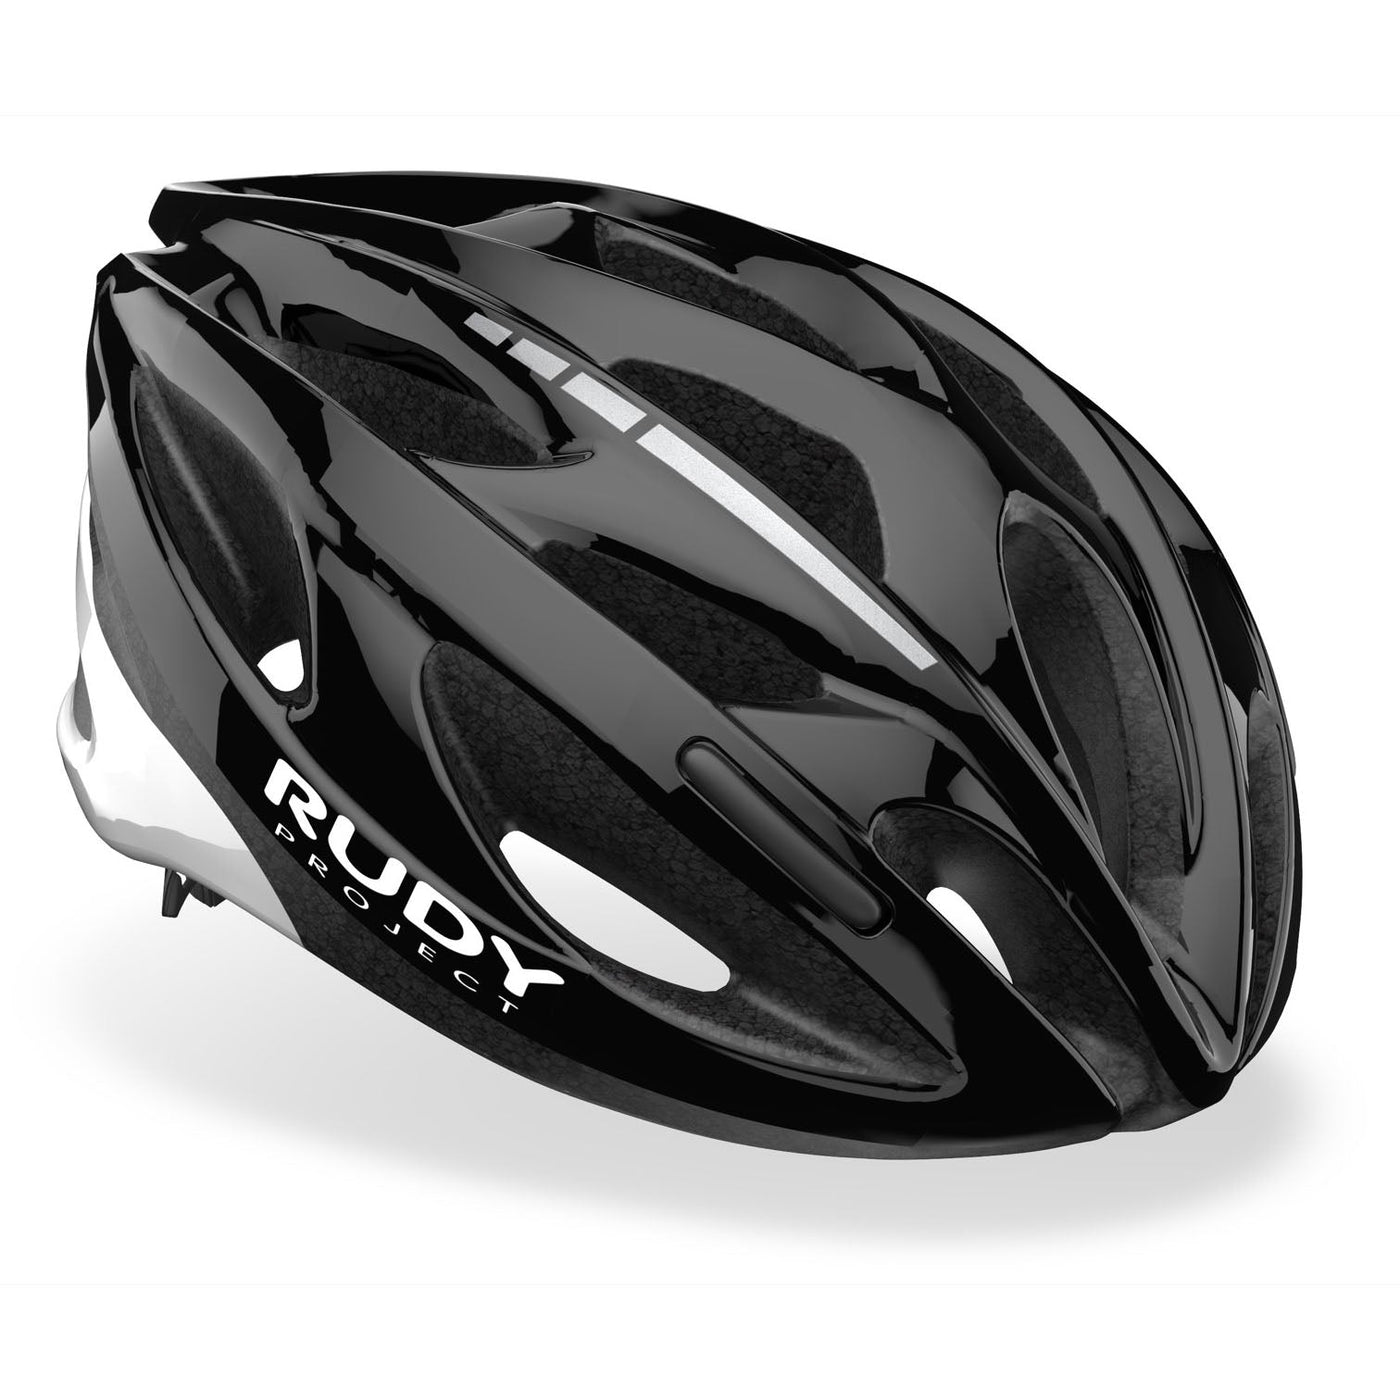 Rudy Project Zumy Road Cycling (Black-Shiny)